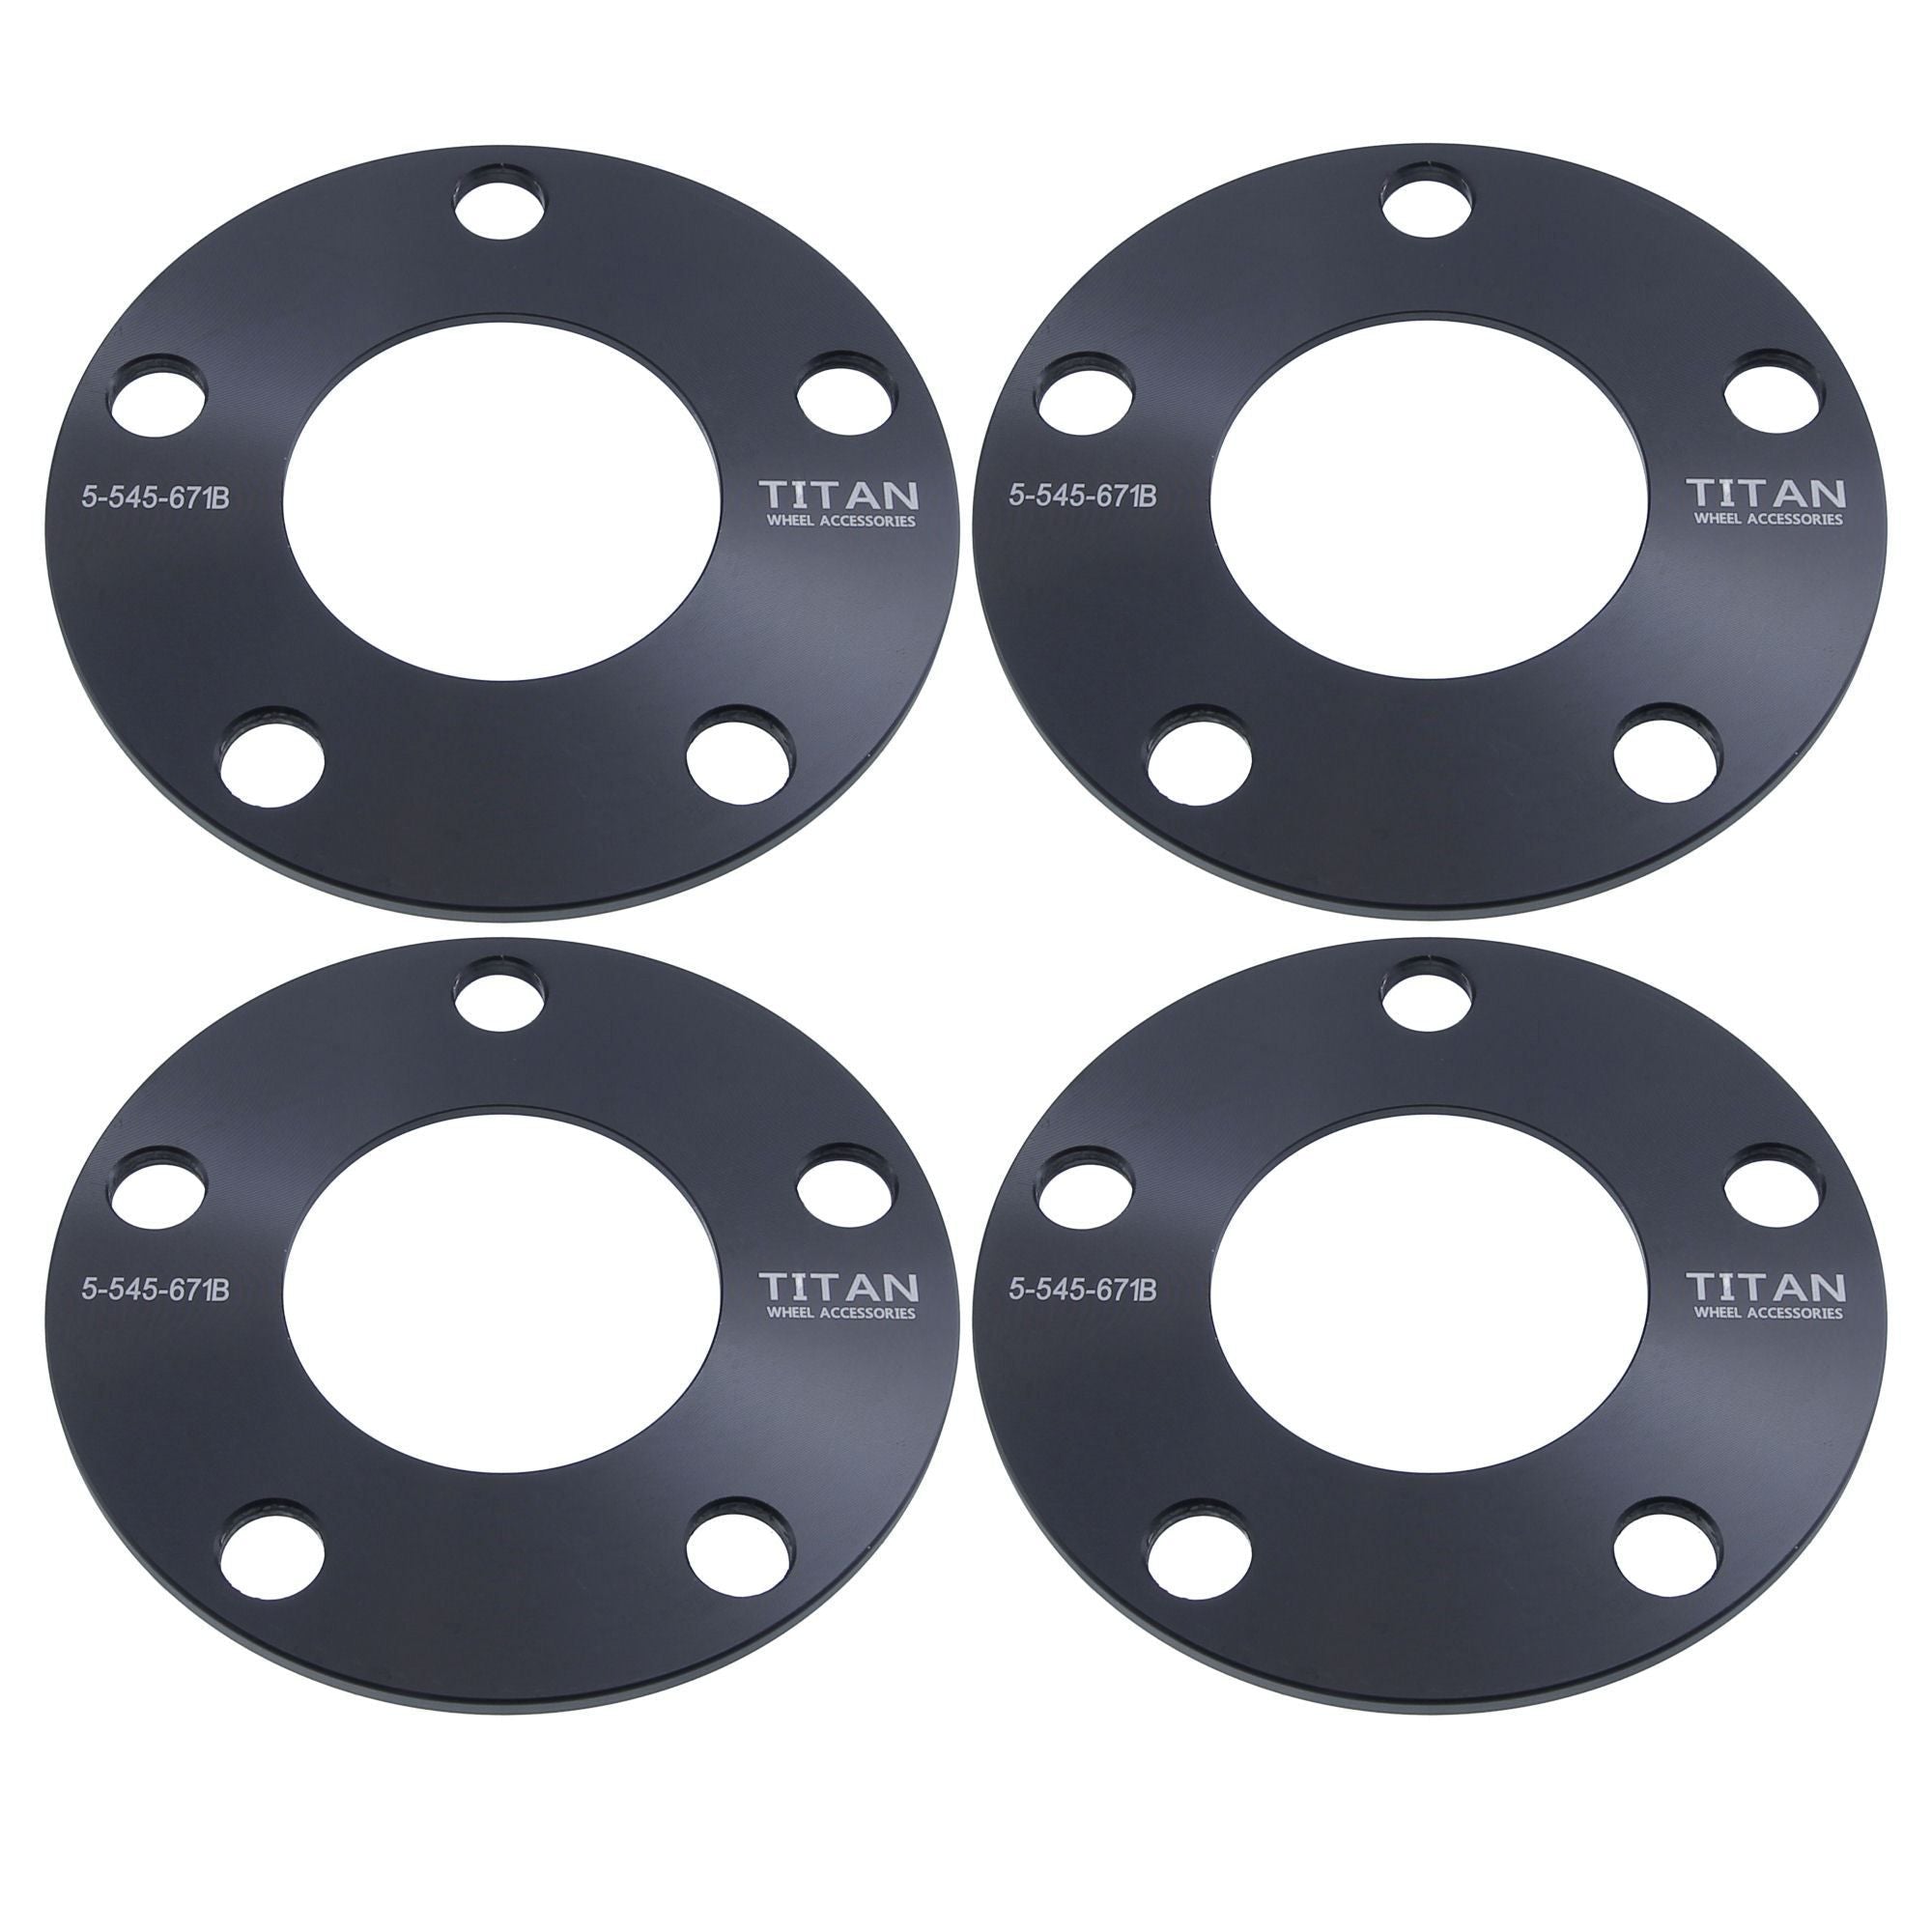 5mm Hubcentric Wheel Spacers for Mitsubishi Lancer Evo | 5x114.3